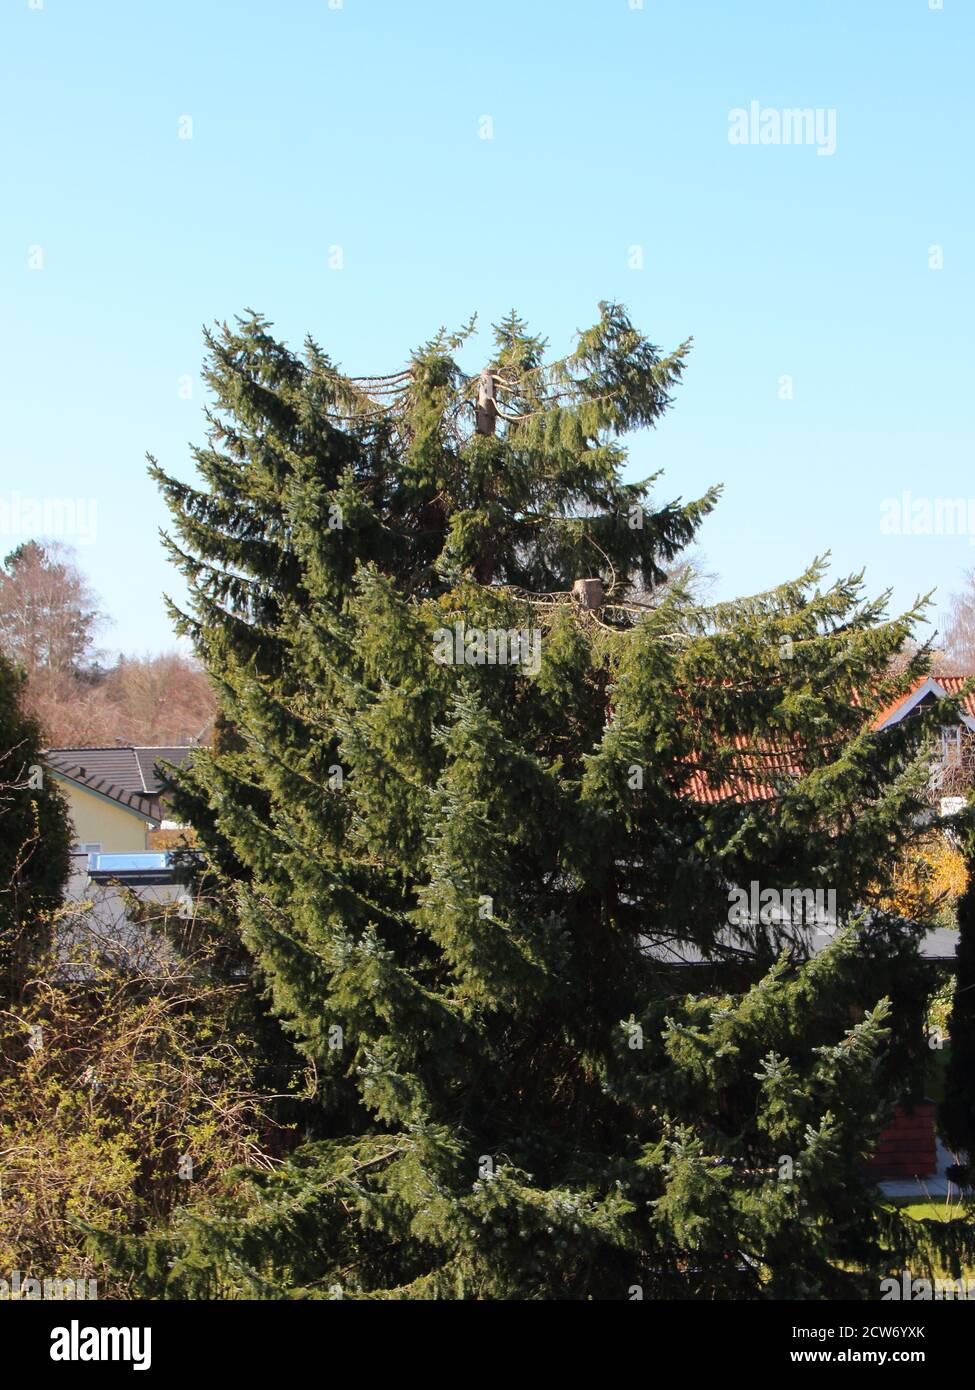 A large green pine tree that has been pollarded. Rooftops of houses can be seen in the background. Stock Photo